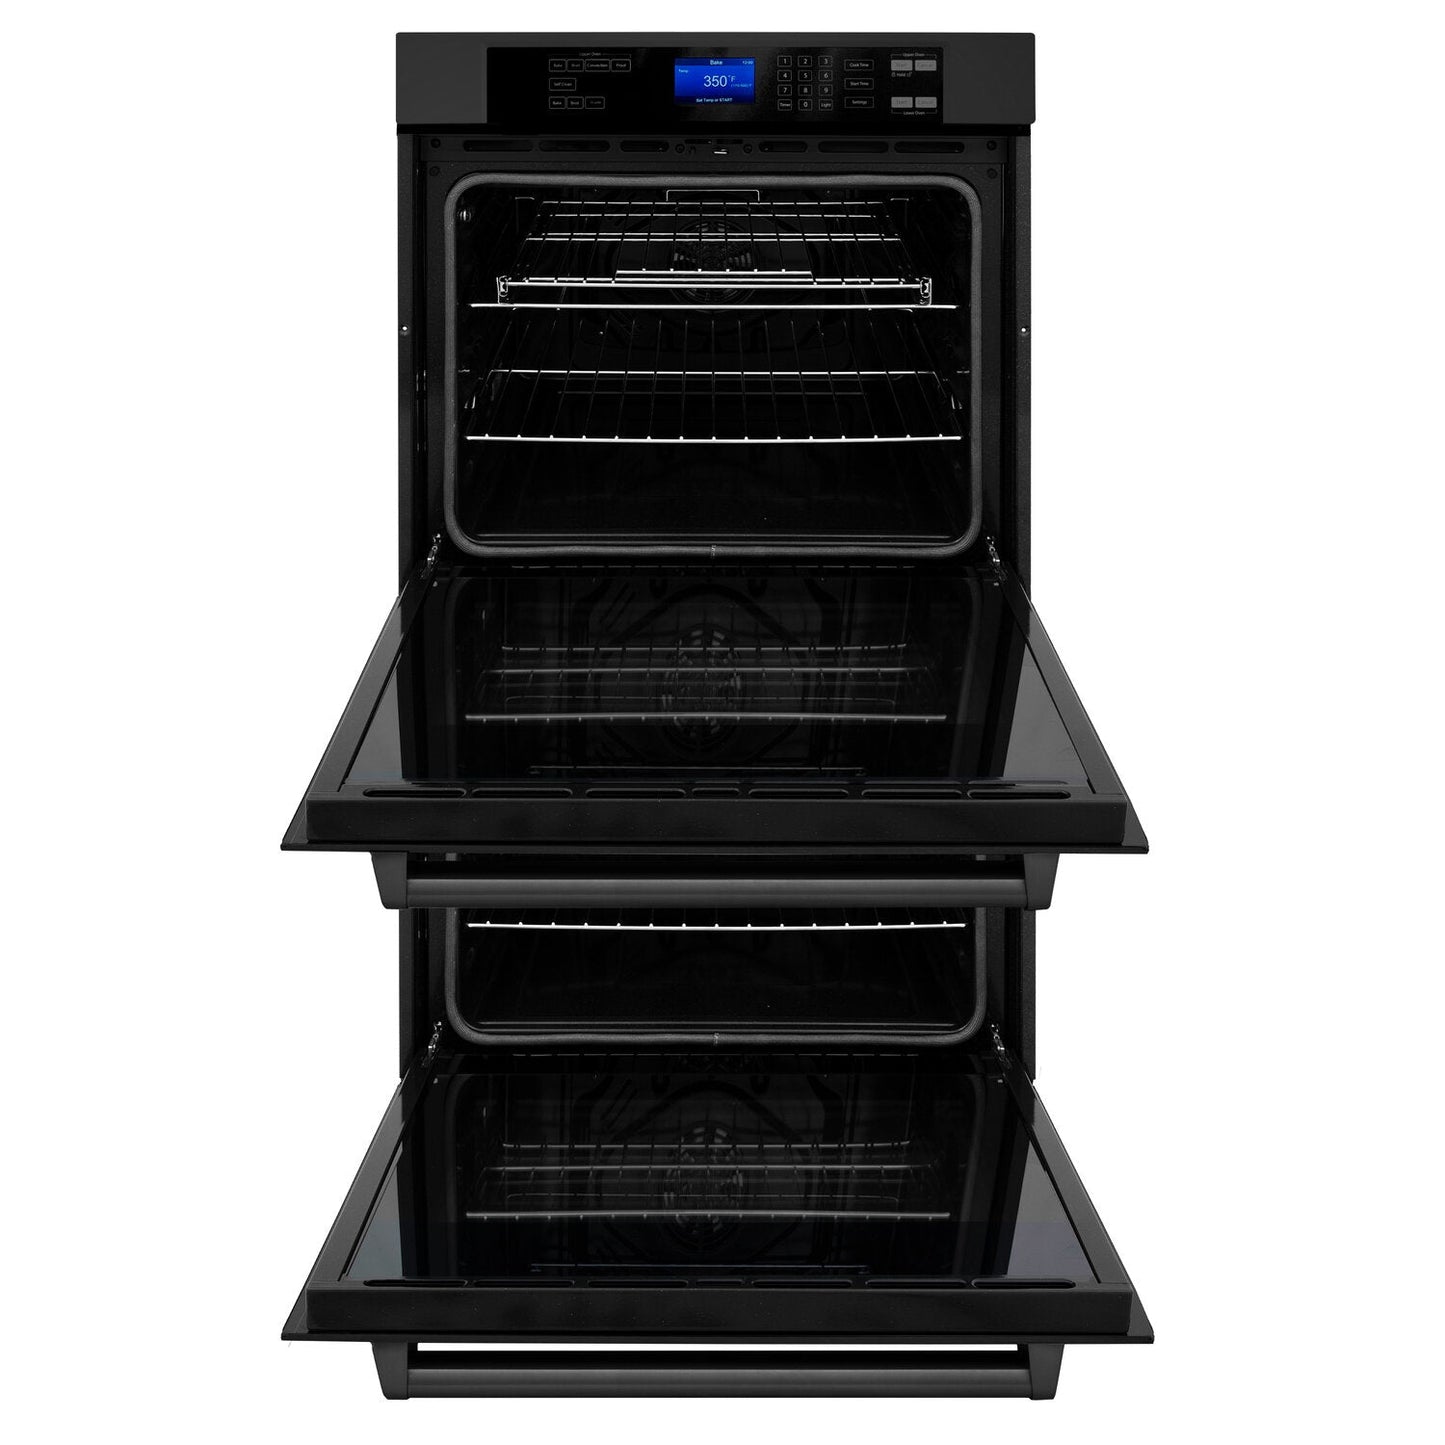 ZLINE Professional 30" Black Stainless Steel Electric Convection Double Wall Oven With Self Clean Technology